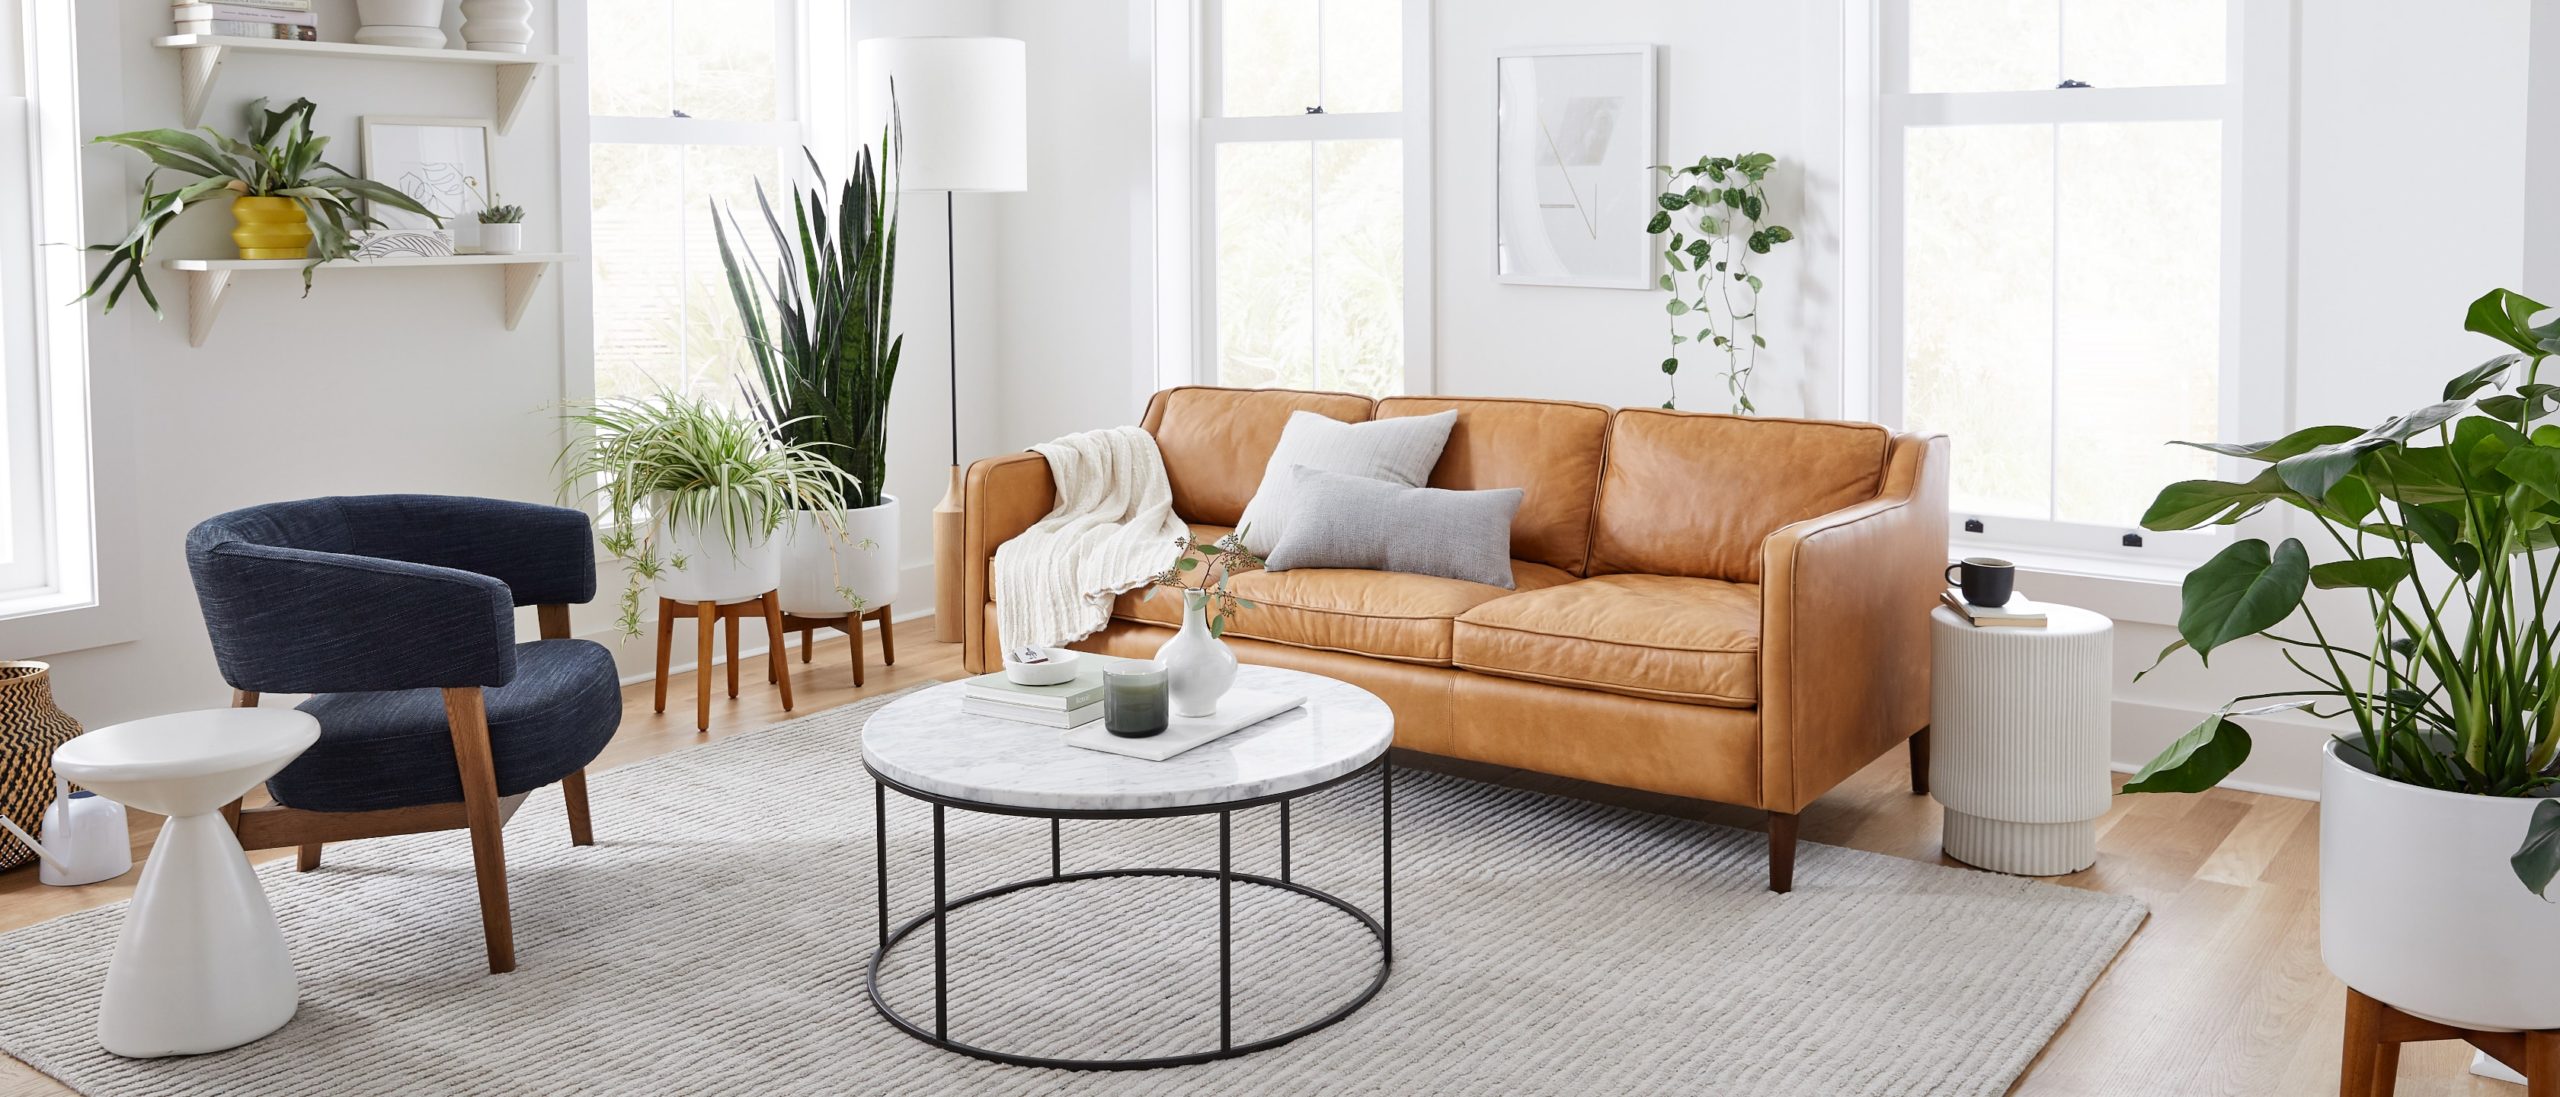 Guide To Small Space Decorating, West Elm Living Room Ideas